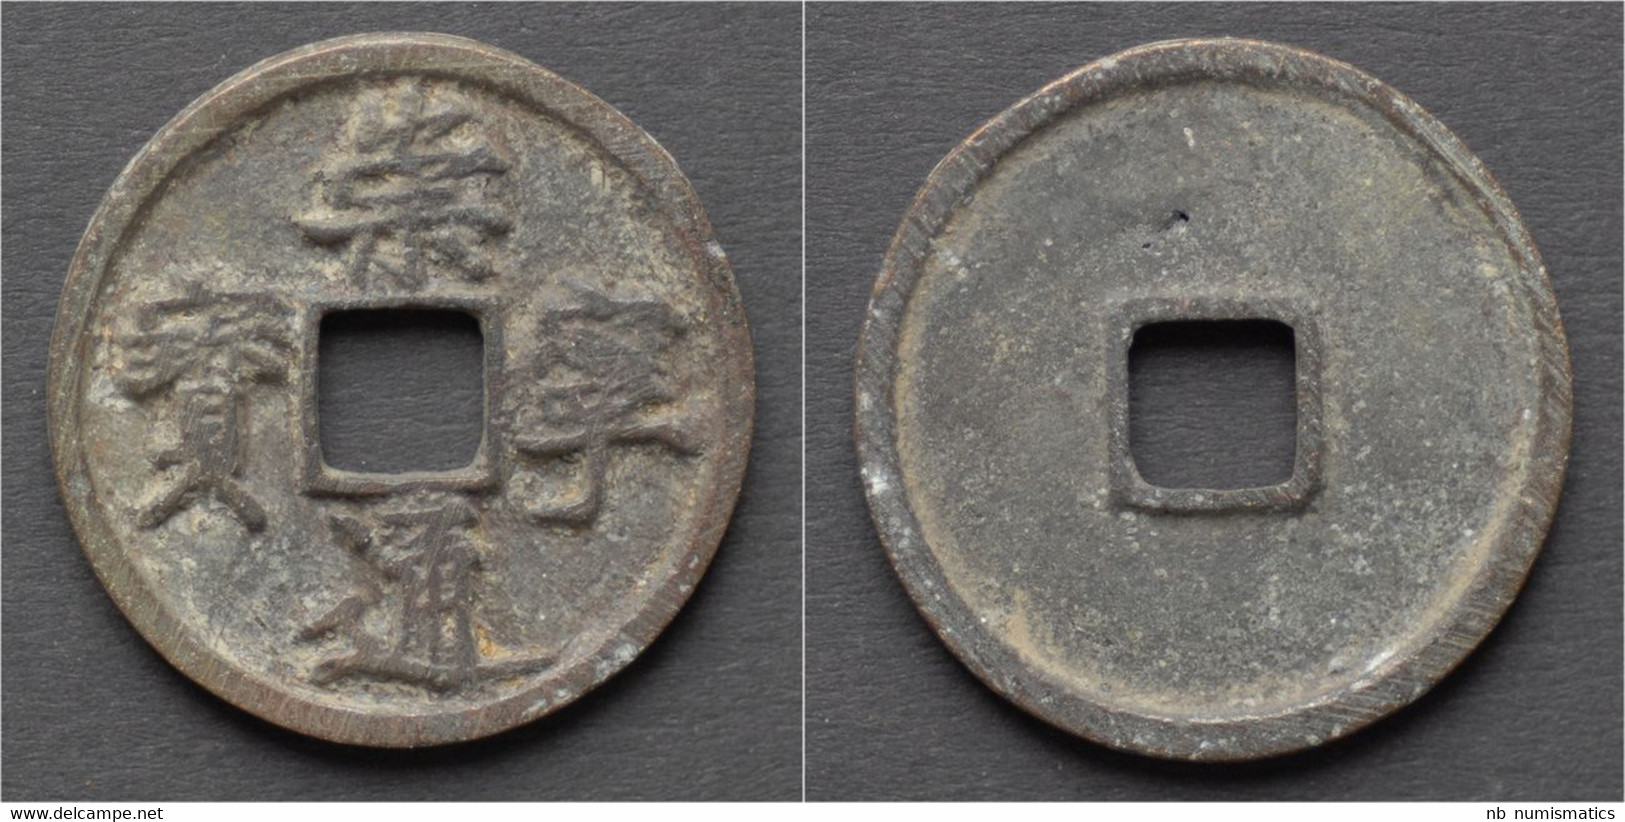 China Northern Song Dynasty Emperor Hui Zong Huge AE 10 Cash - Chinoises